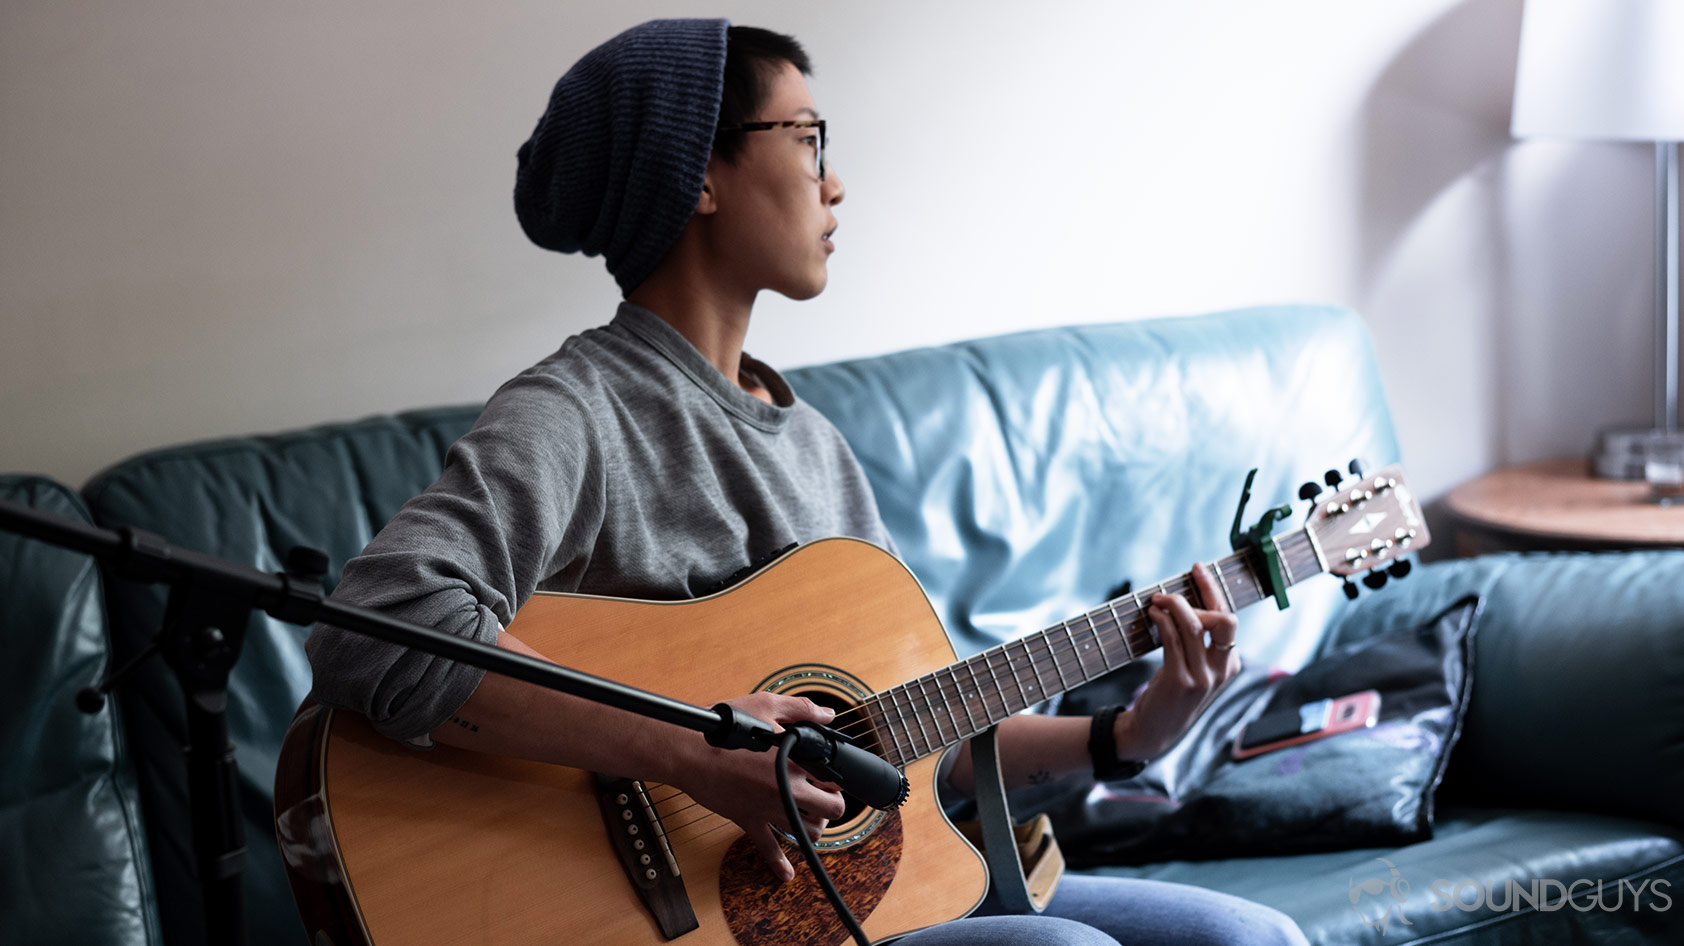 A picture of woman playing guitar and recording it with the Shure SM57 XLR mic to illustrate artist recordings.